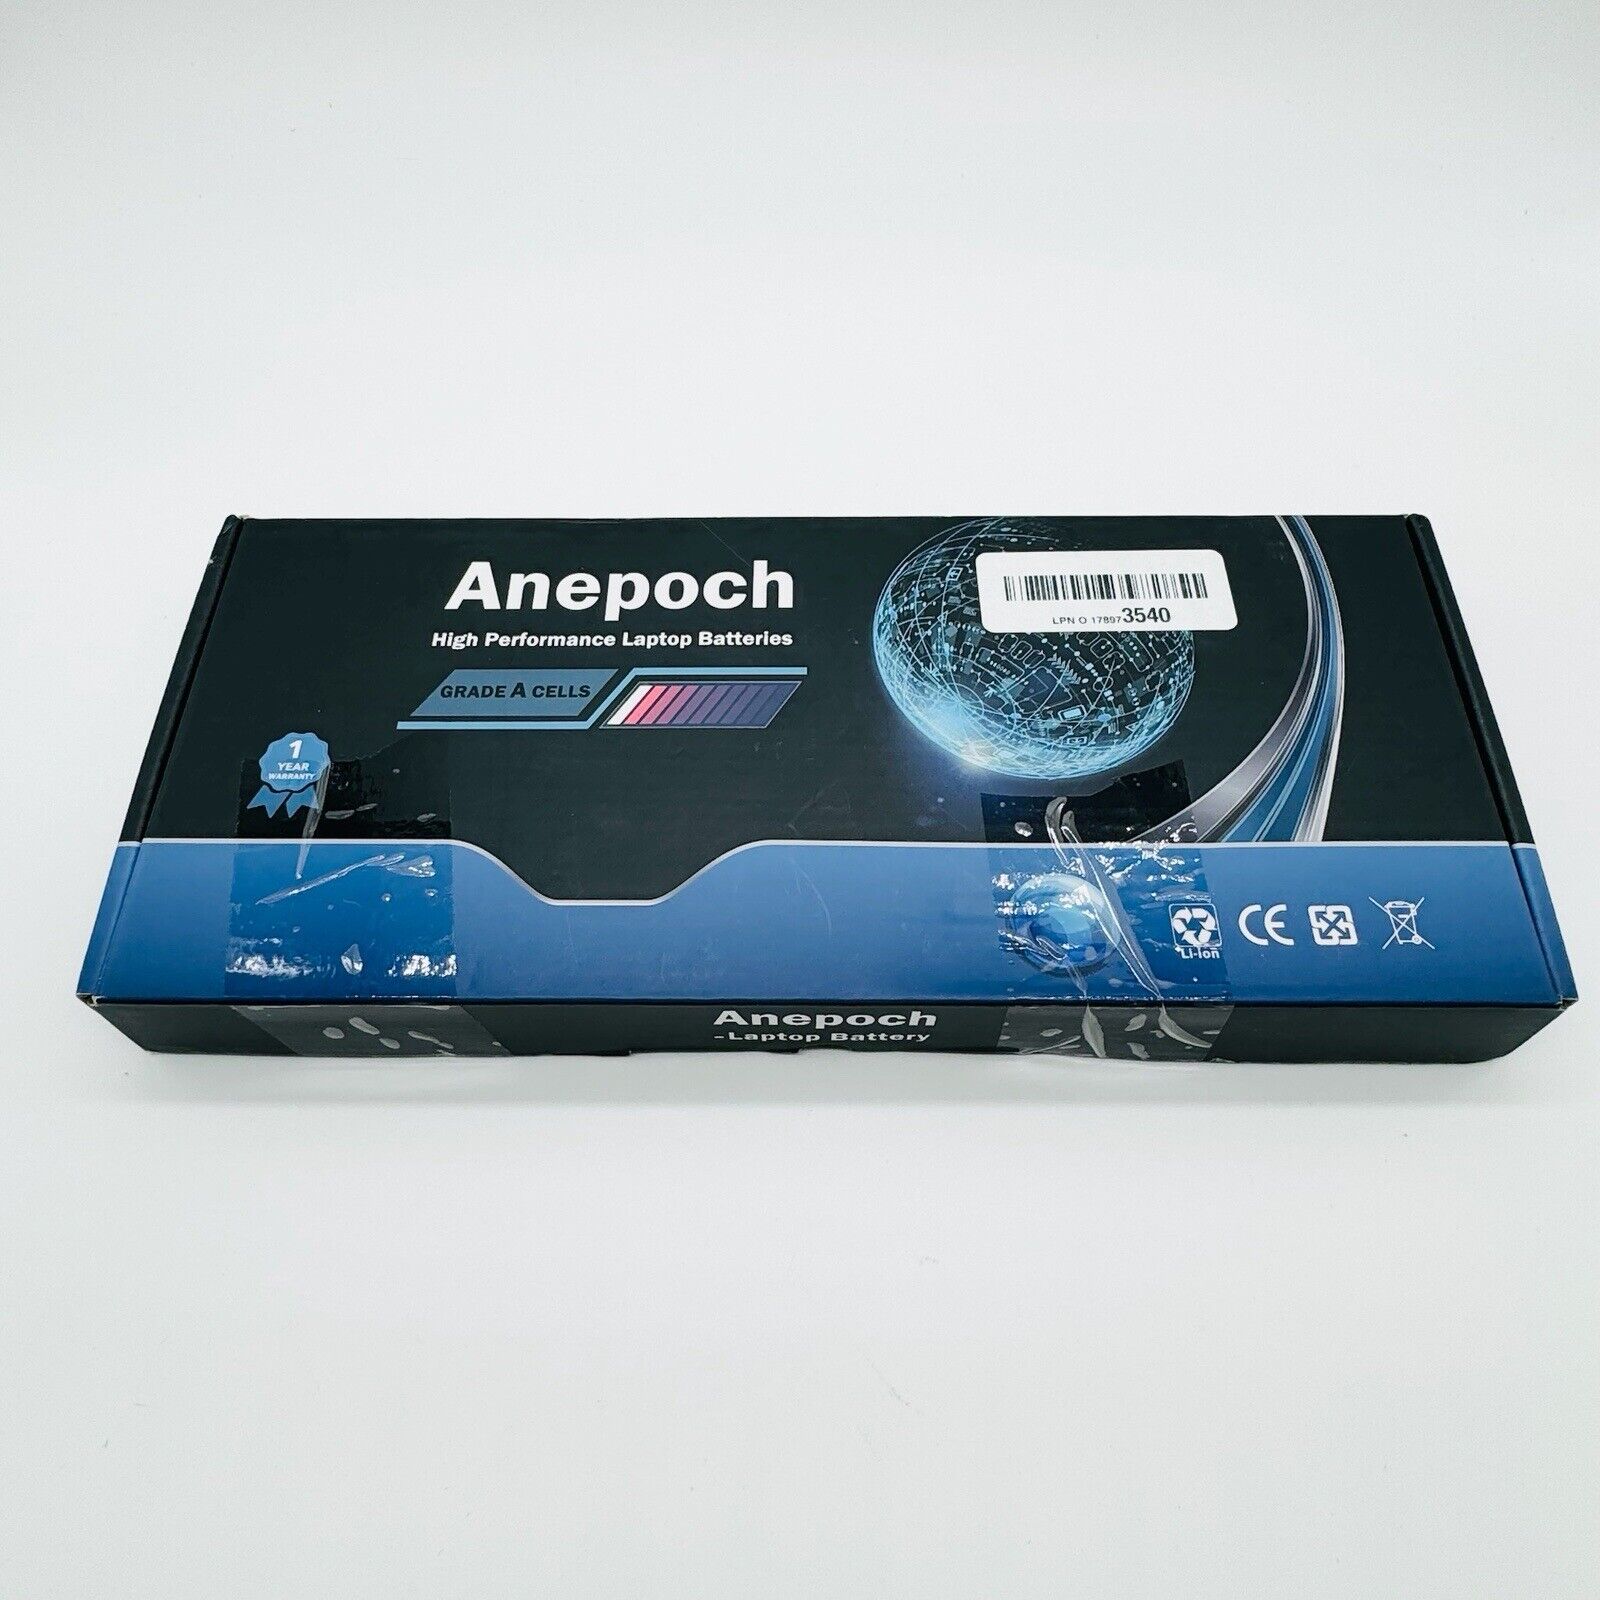 Anepoch DXGH8 Laptop Battery Replacement for Dell XPS 13 9370 9380 7930 Inspiron